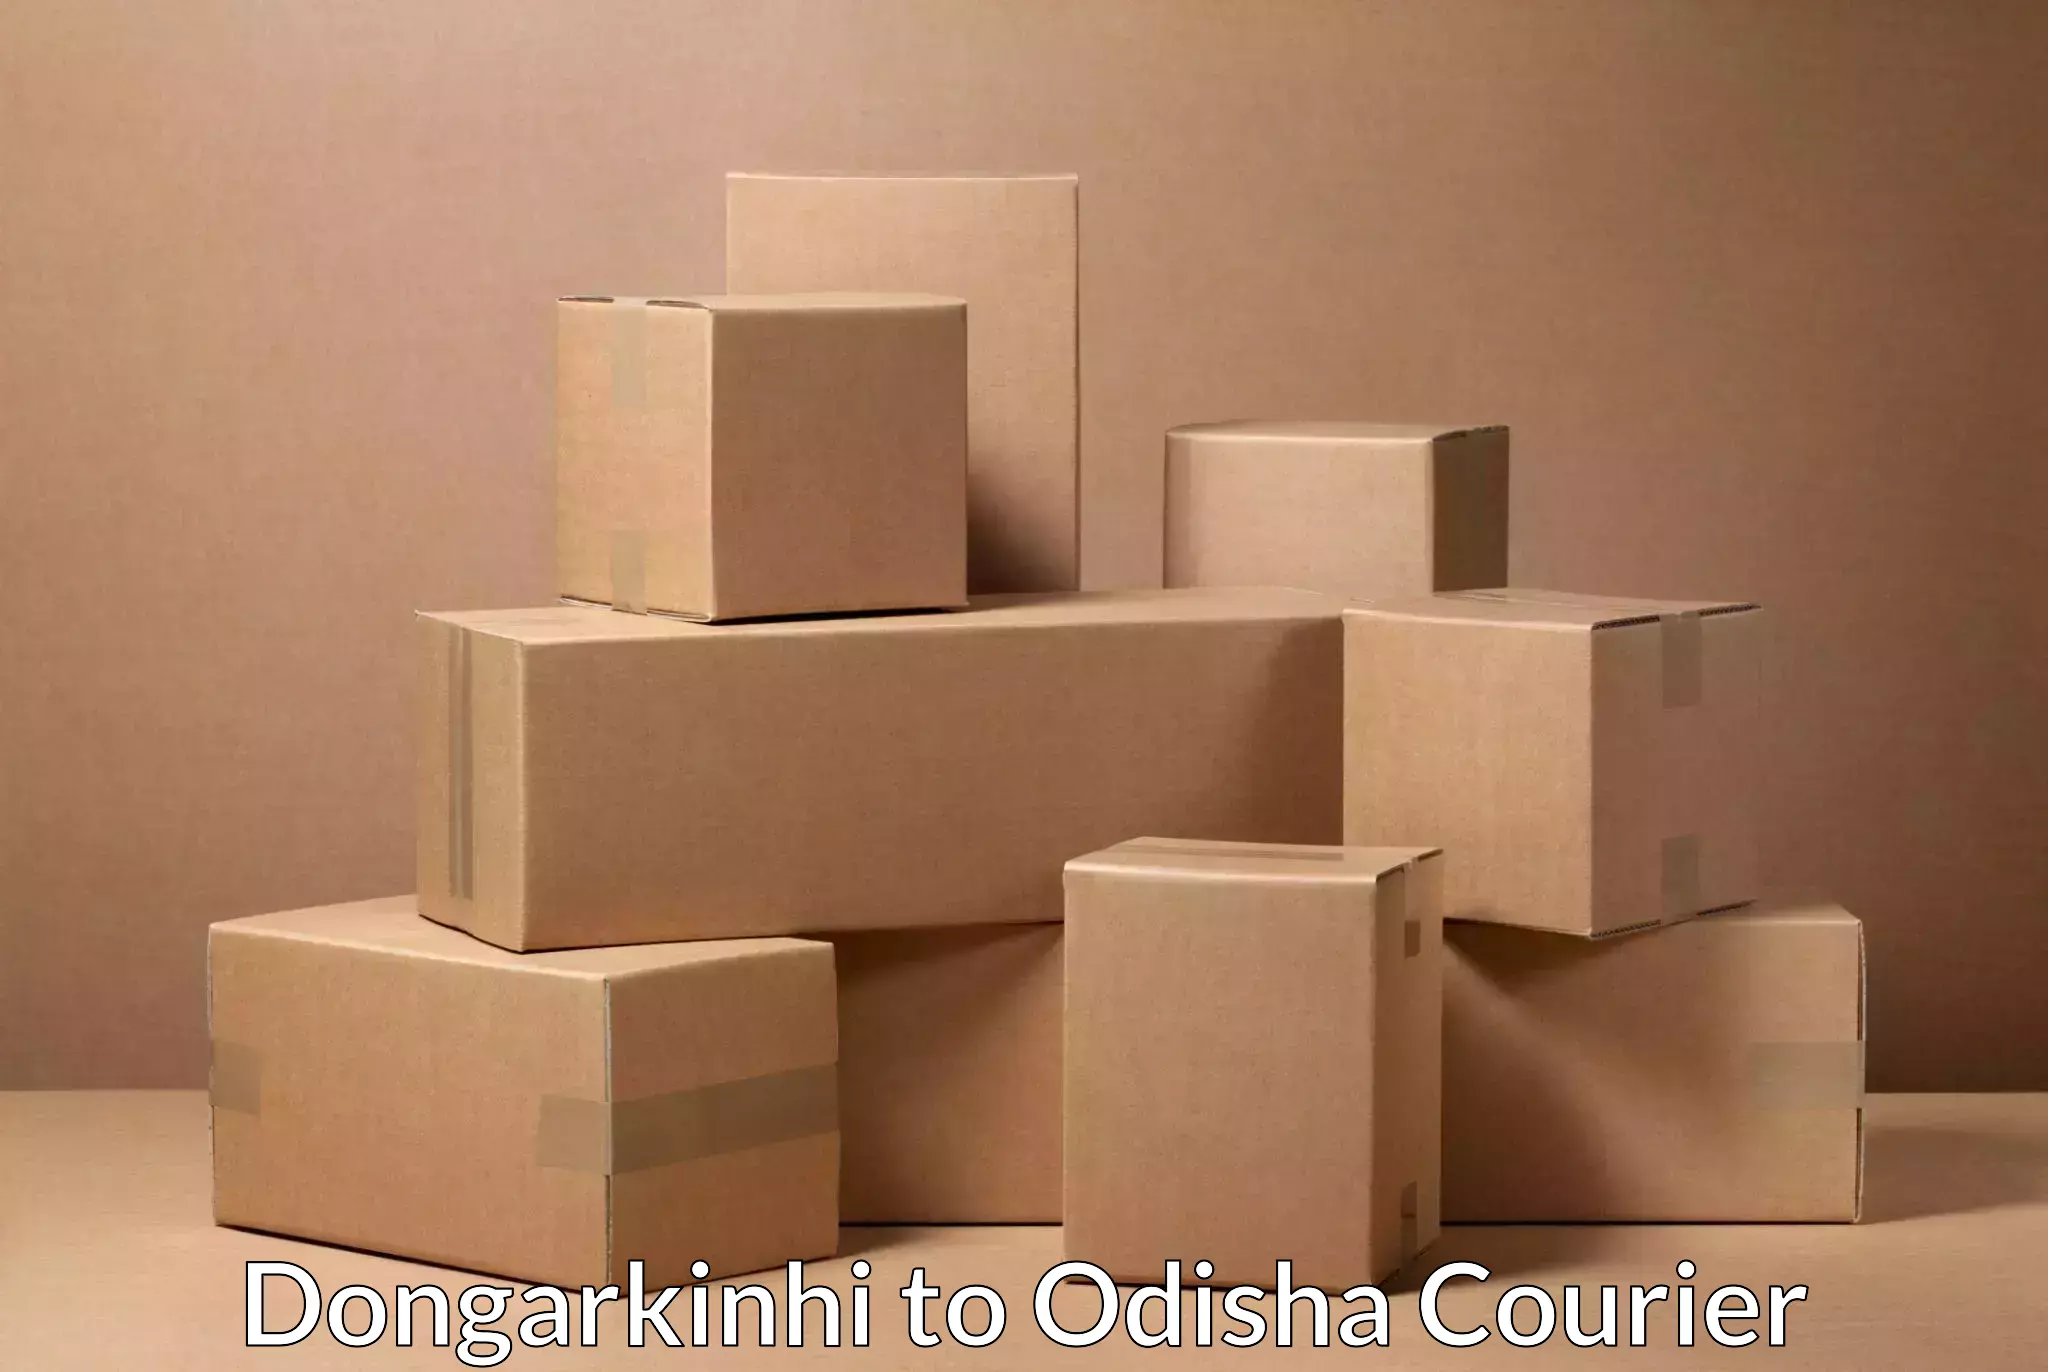 Local courier options Dongarkinhi to Sohela